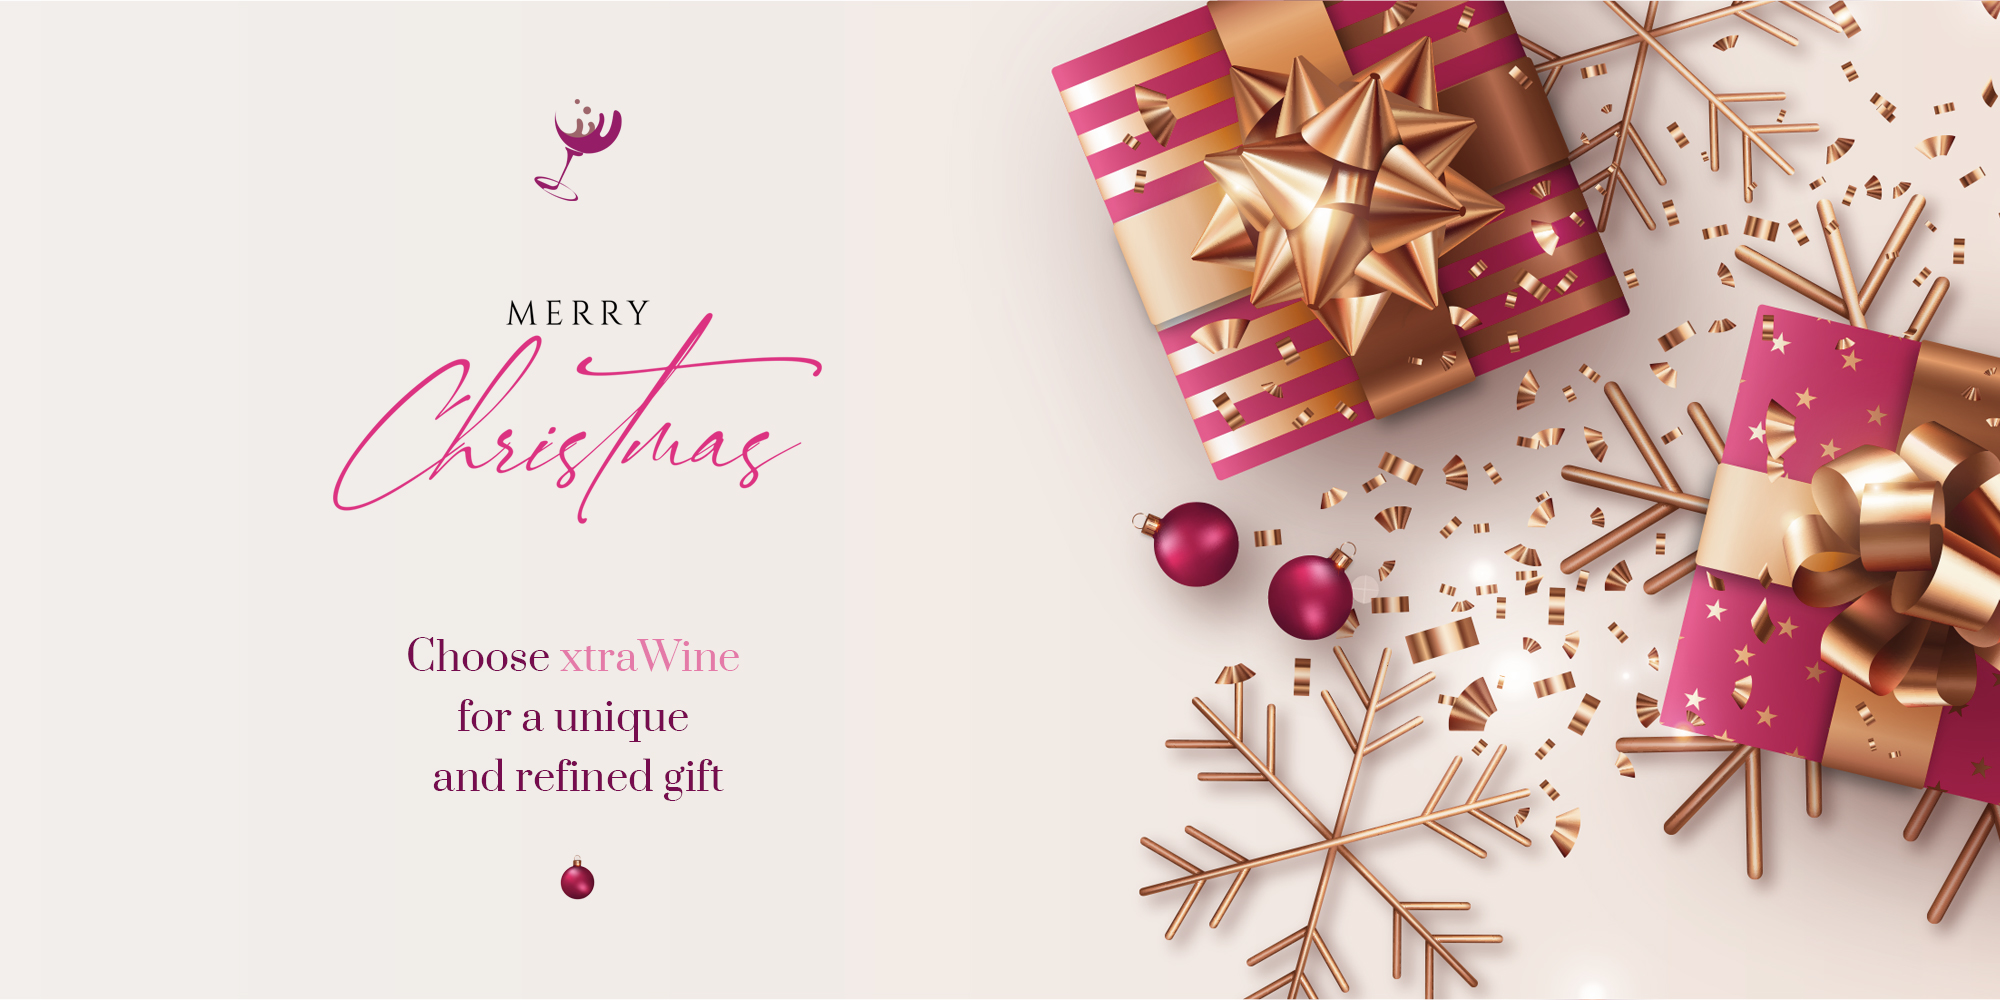 Wine, the perfect gift